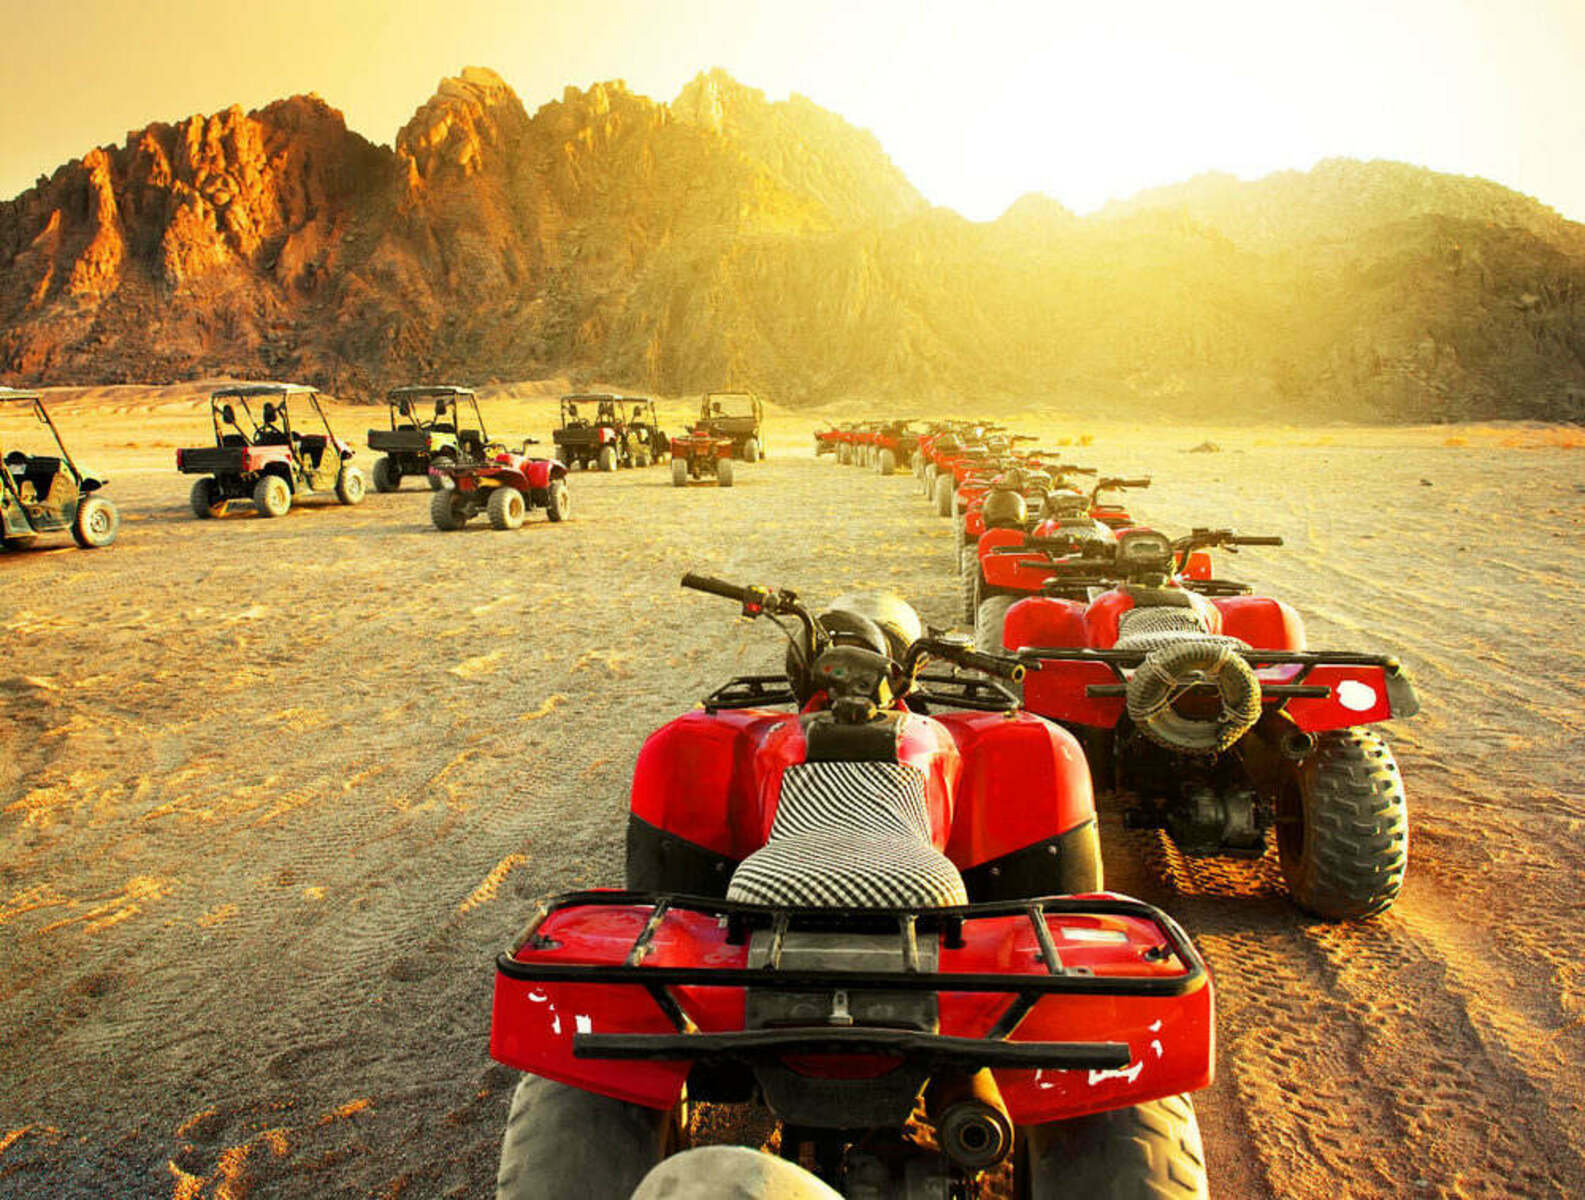 Royal safari - quad bikes, buggies, camels and dinner with dancing in a Bedouin village